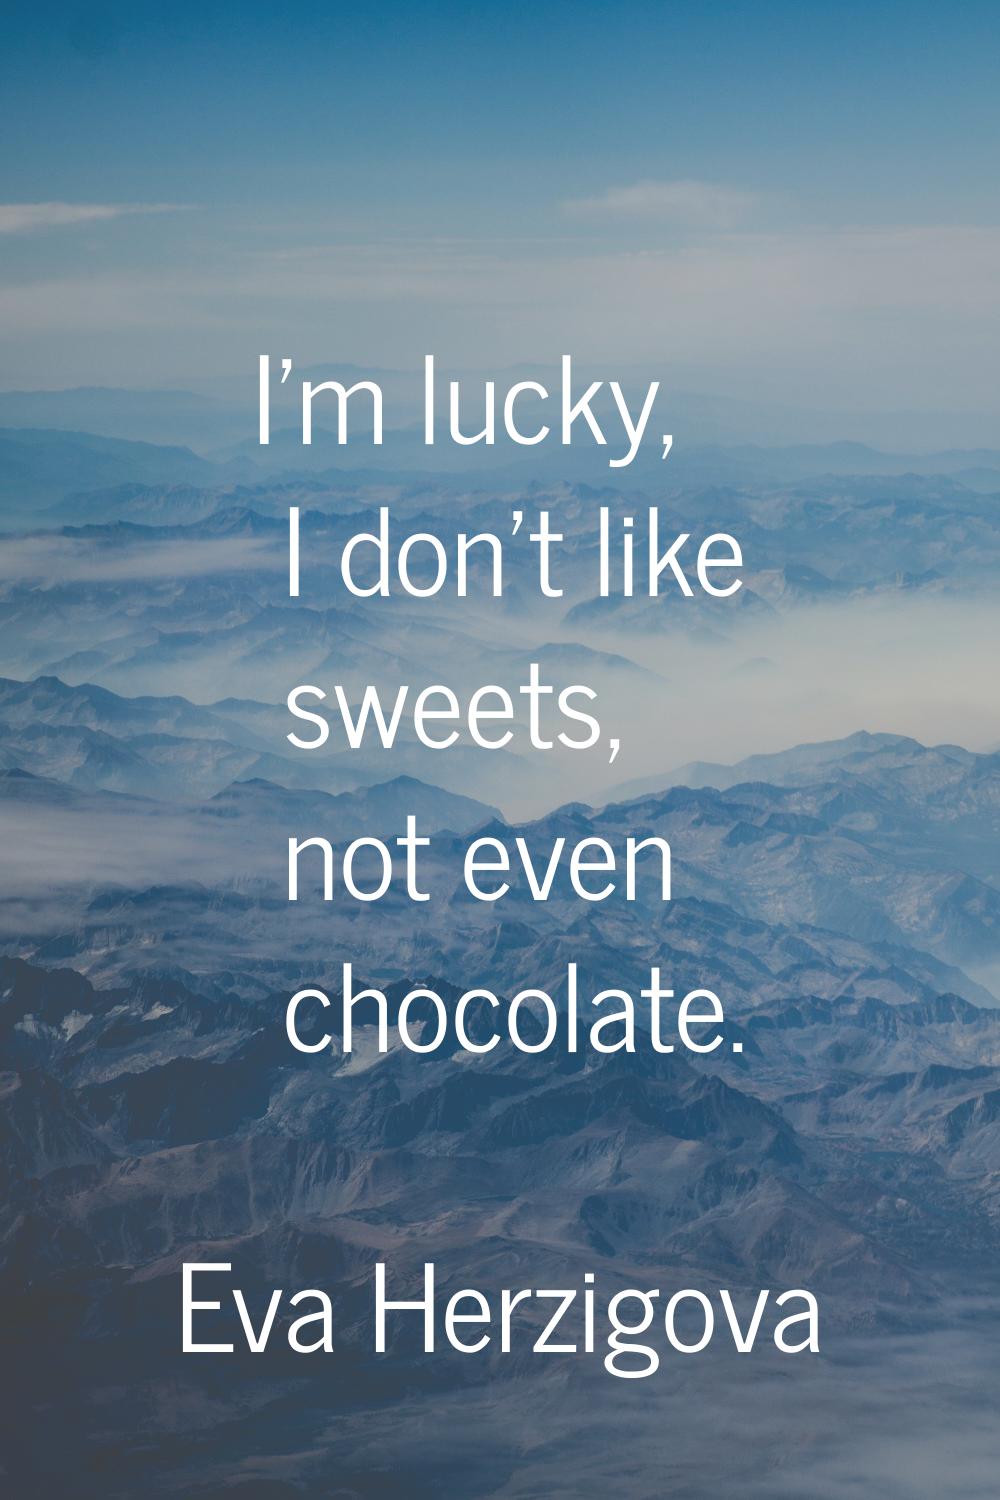 I'm lucky, I don't like sweets, not even chocolate.